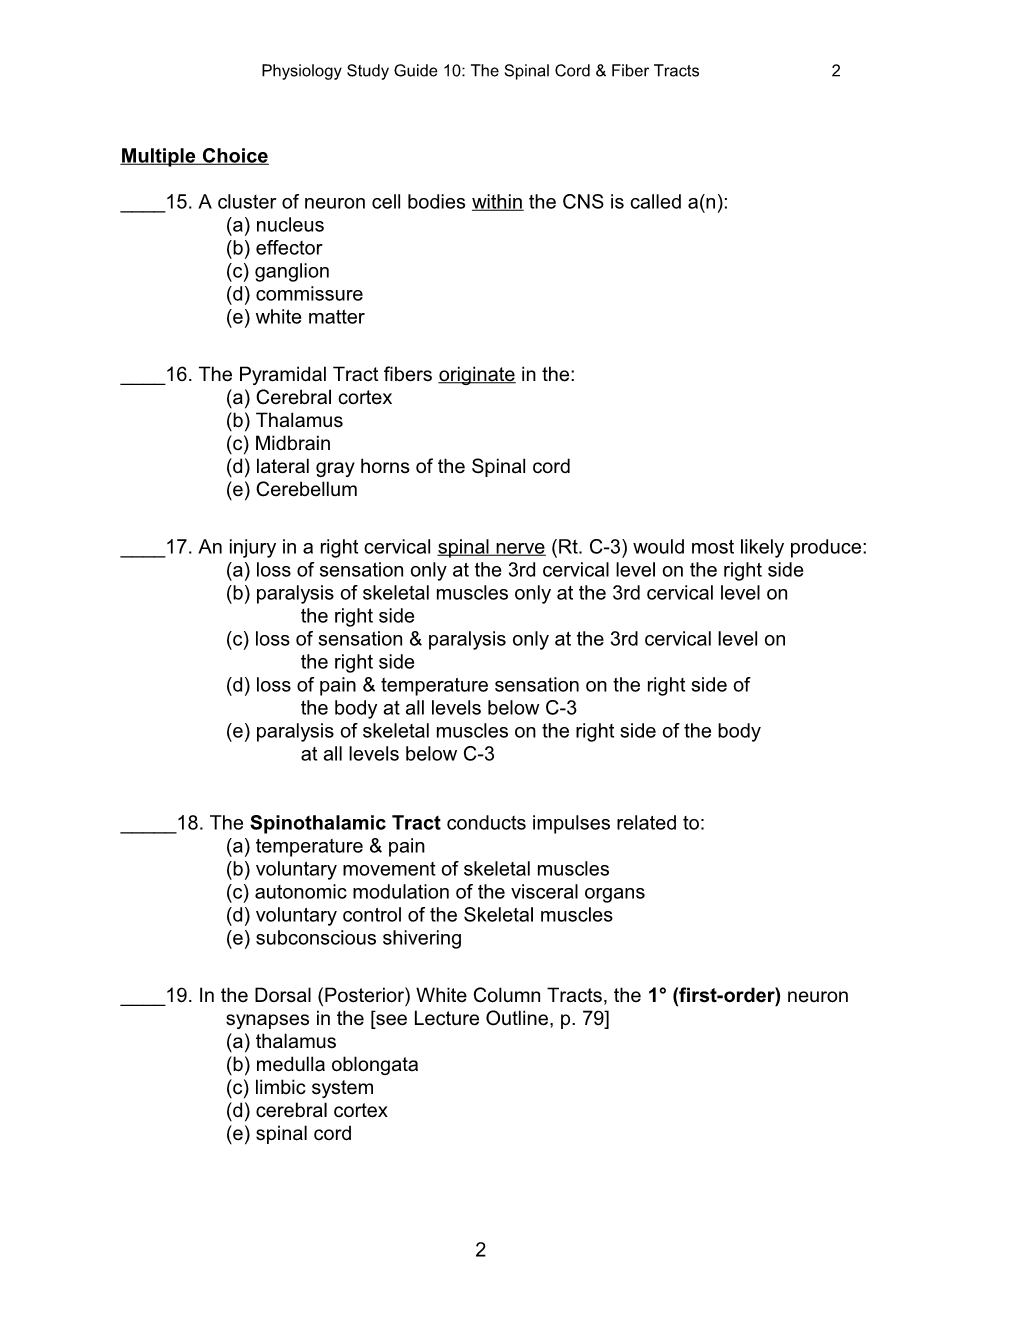 Physiology Study Guide 10: the Spinal Cord & Fiber Tracts1